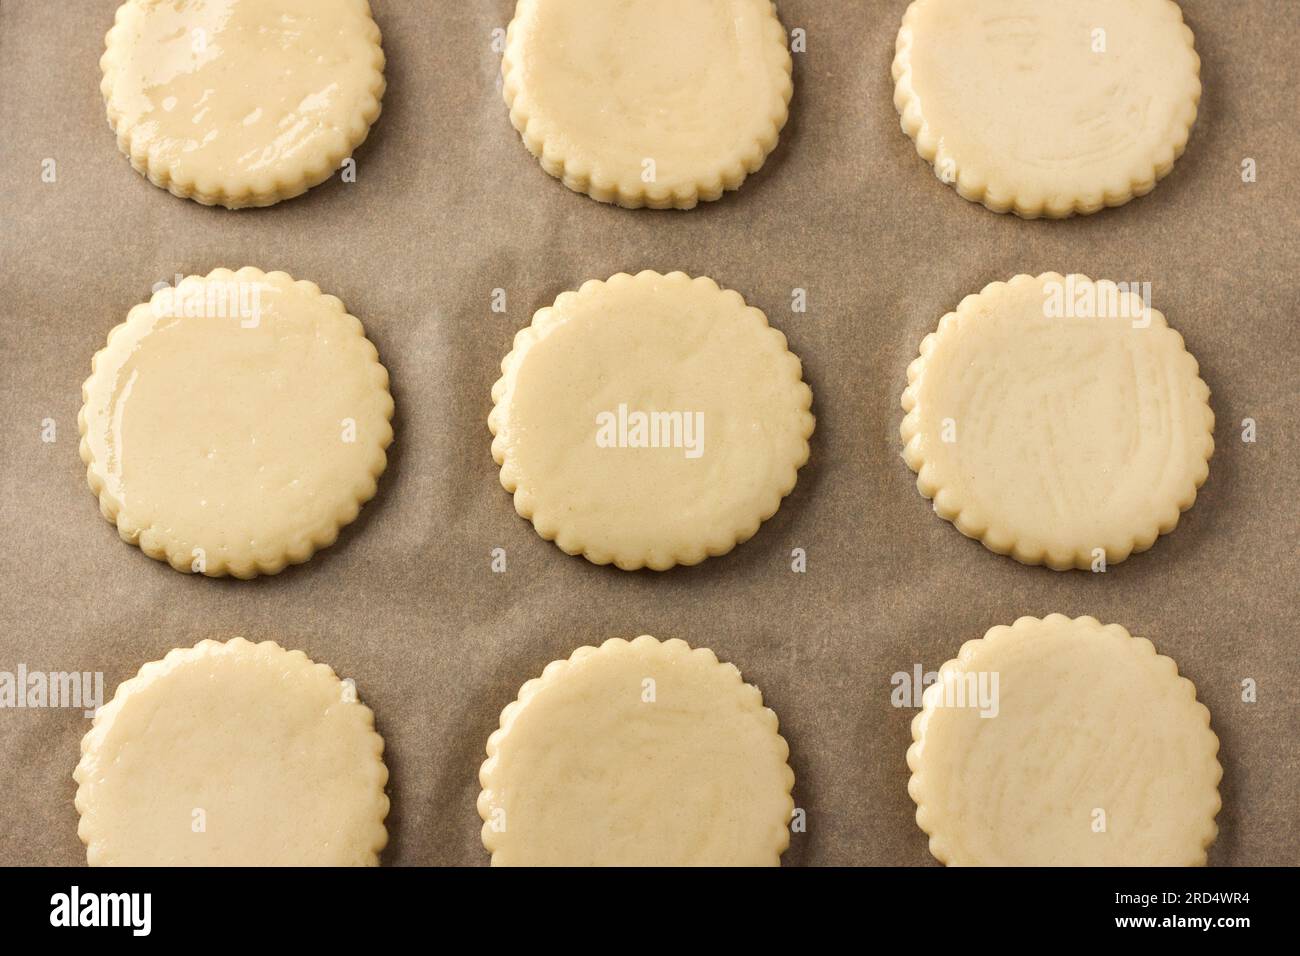 Milk shortbread before baking, greased with egg on parchment, top view. DIY, step by step, step 9. Stock Photo